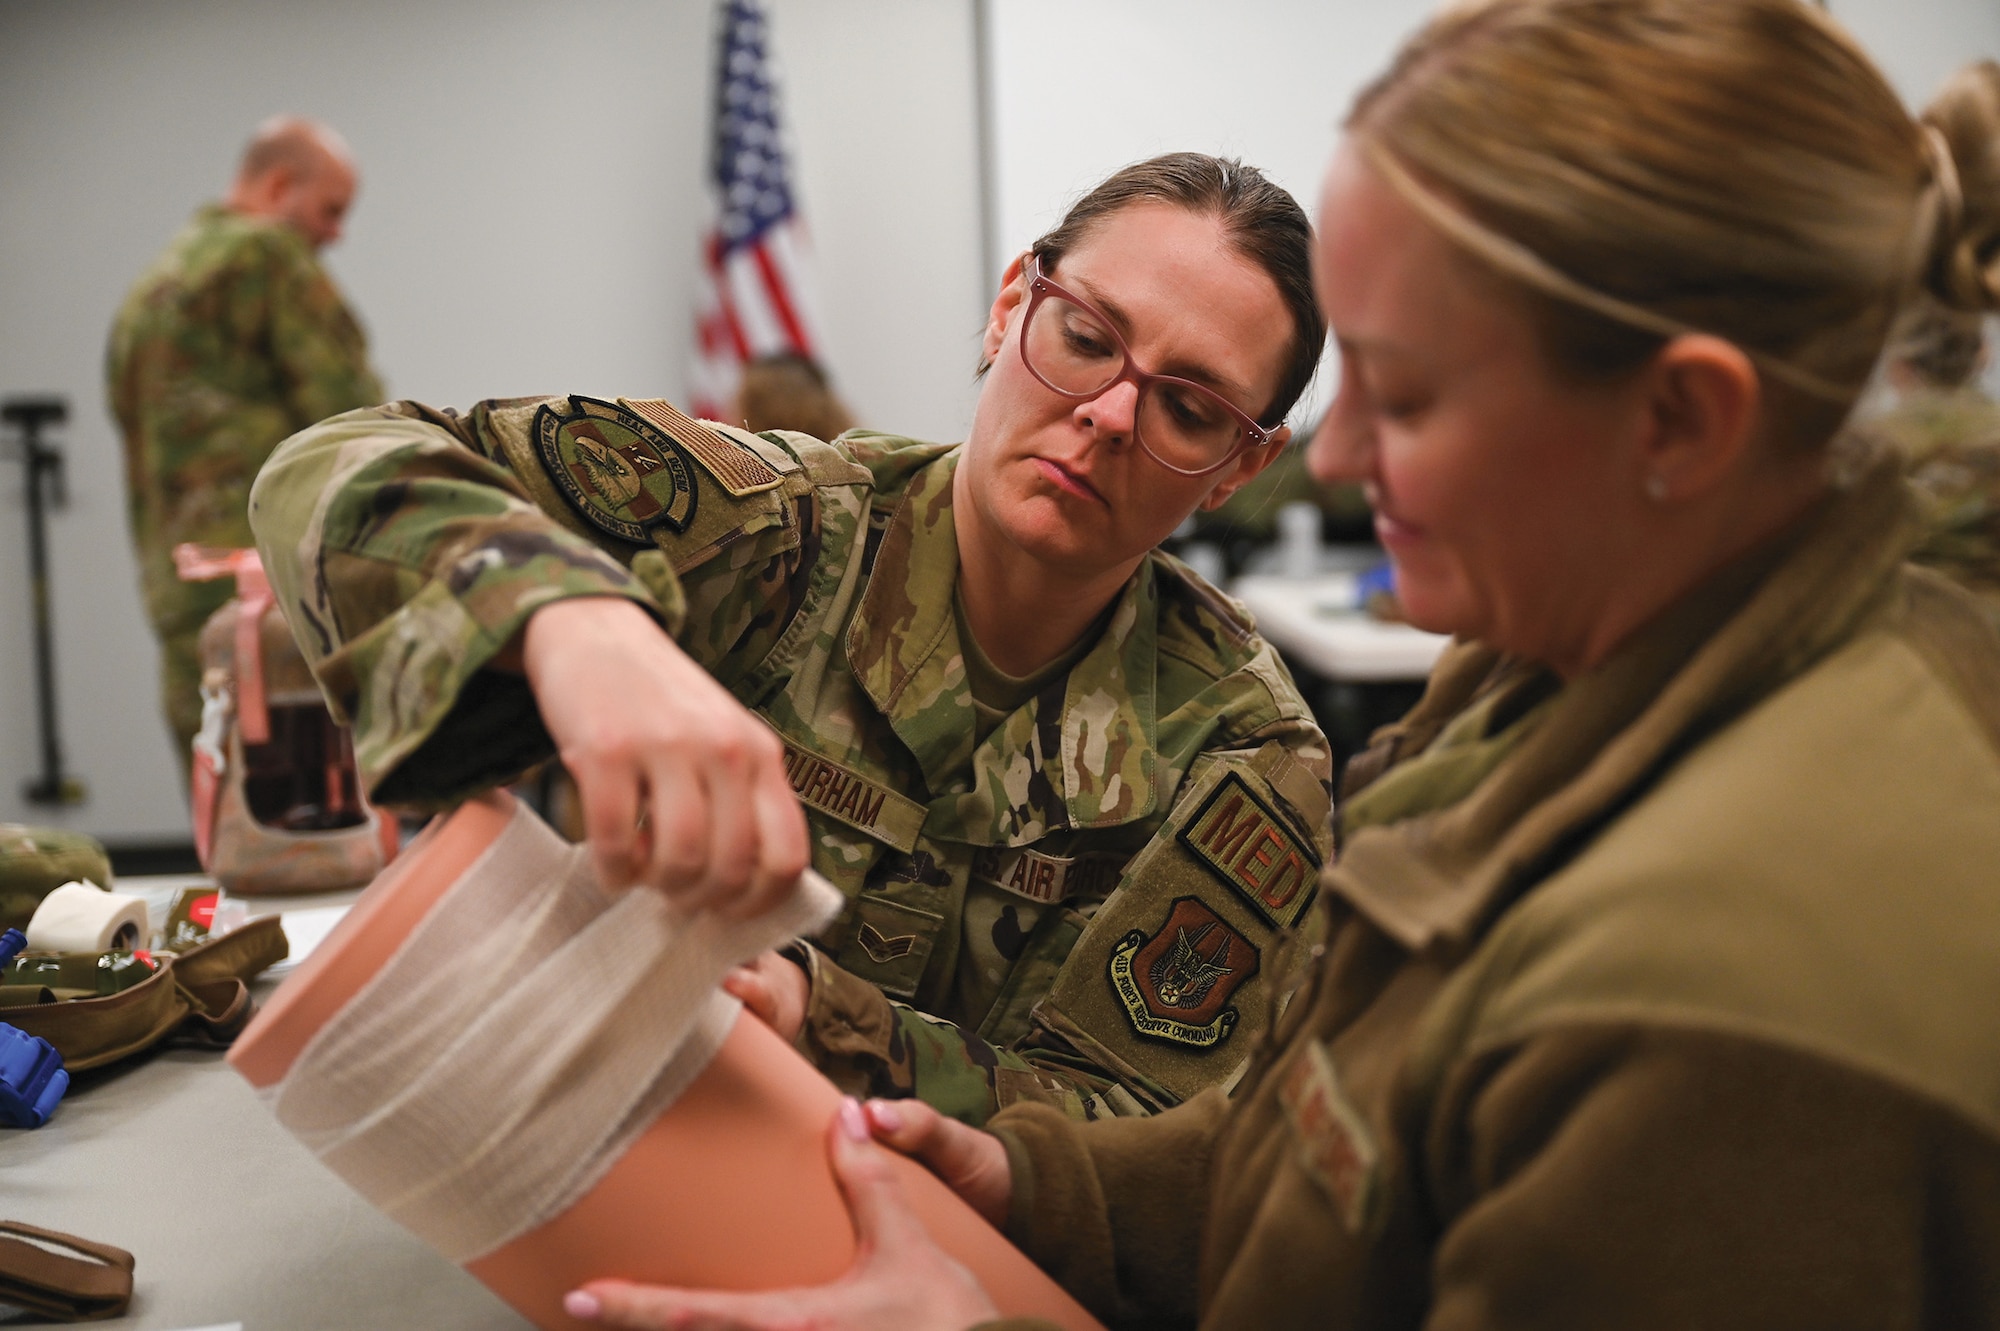 Senior Airman Sarah Durham, 445th Aeromedical Staging Squadron medical technician, applies a pressure dressing on a training mannequin while Master Sgt. Amanda Crider, 445th Aerospace Medicine Squadron flight and operational medical technician, applies pressure during Tactical Combat Casualty Care training at Wright-Patterson Air Force Base, Ohio, March 11, 2024. (U.S. Air Force photo/Mr. Patrick OReilly)